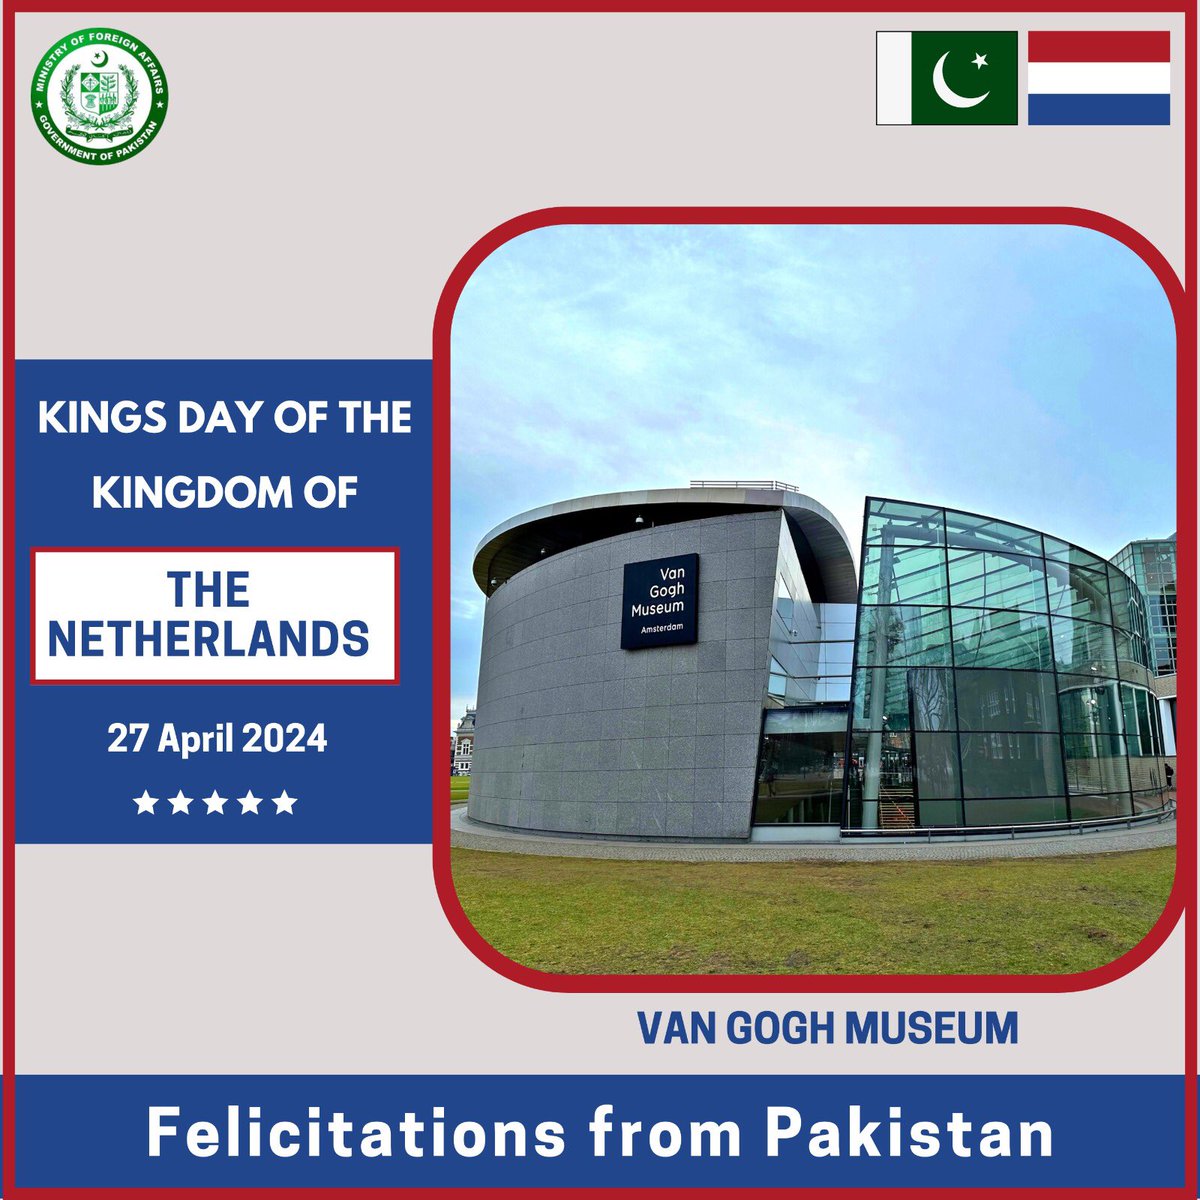 On the occasion of Kings Day of the Kingdom of the #Netherlands, we extend our heartiest felicitations to its people and Government. @DutchMFA @PakinNetherland 🇵🇰🤝🇳🇱